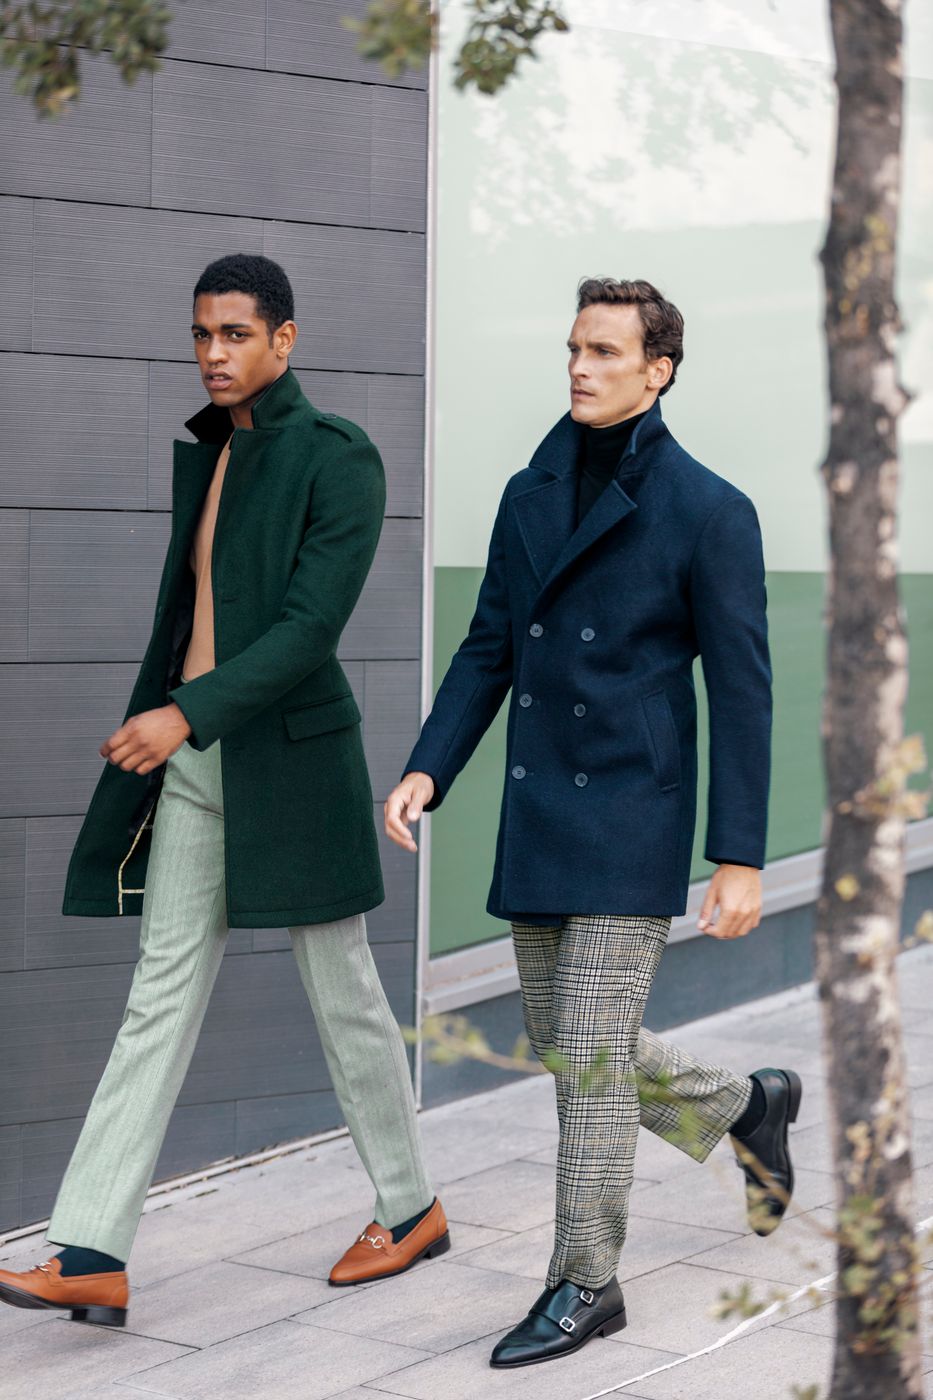 How to Wear an Overcoat? 